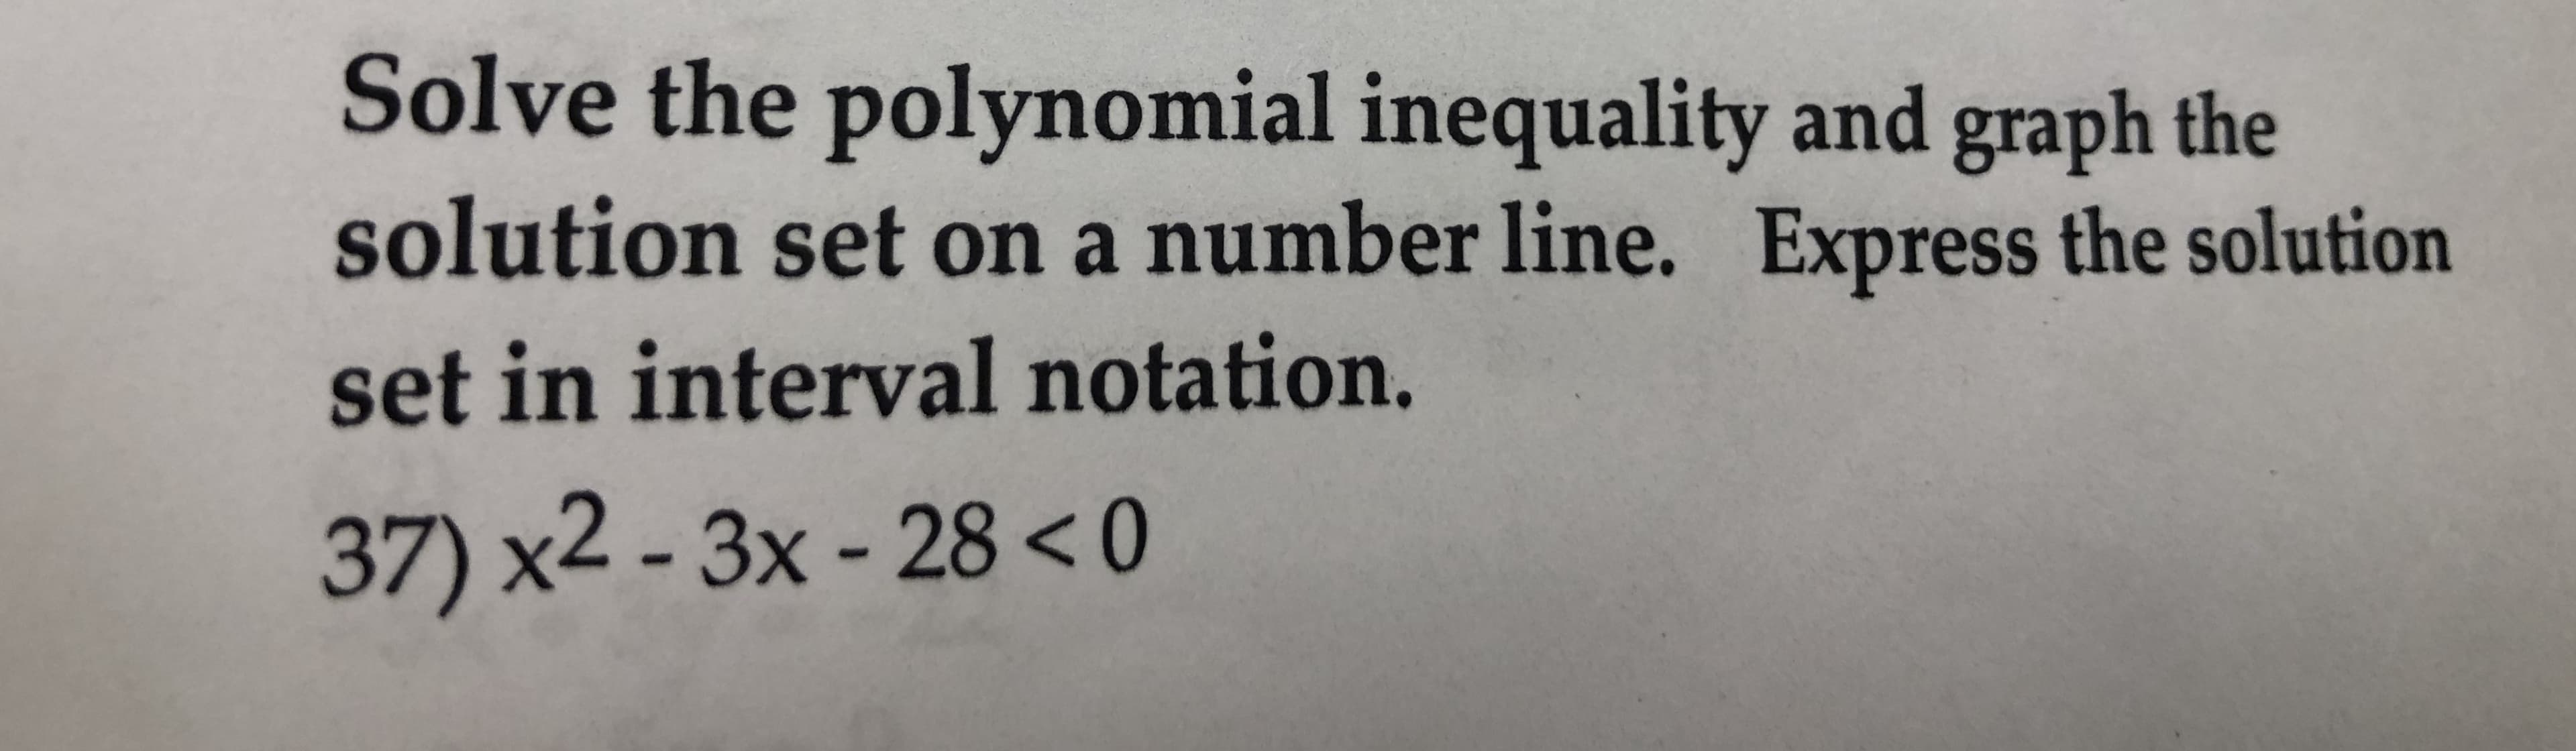 Solve the polynomial inequality and graph the
solution set on a number line. Express the solution
set in interval notation.
37) x2-3x -28 <0
